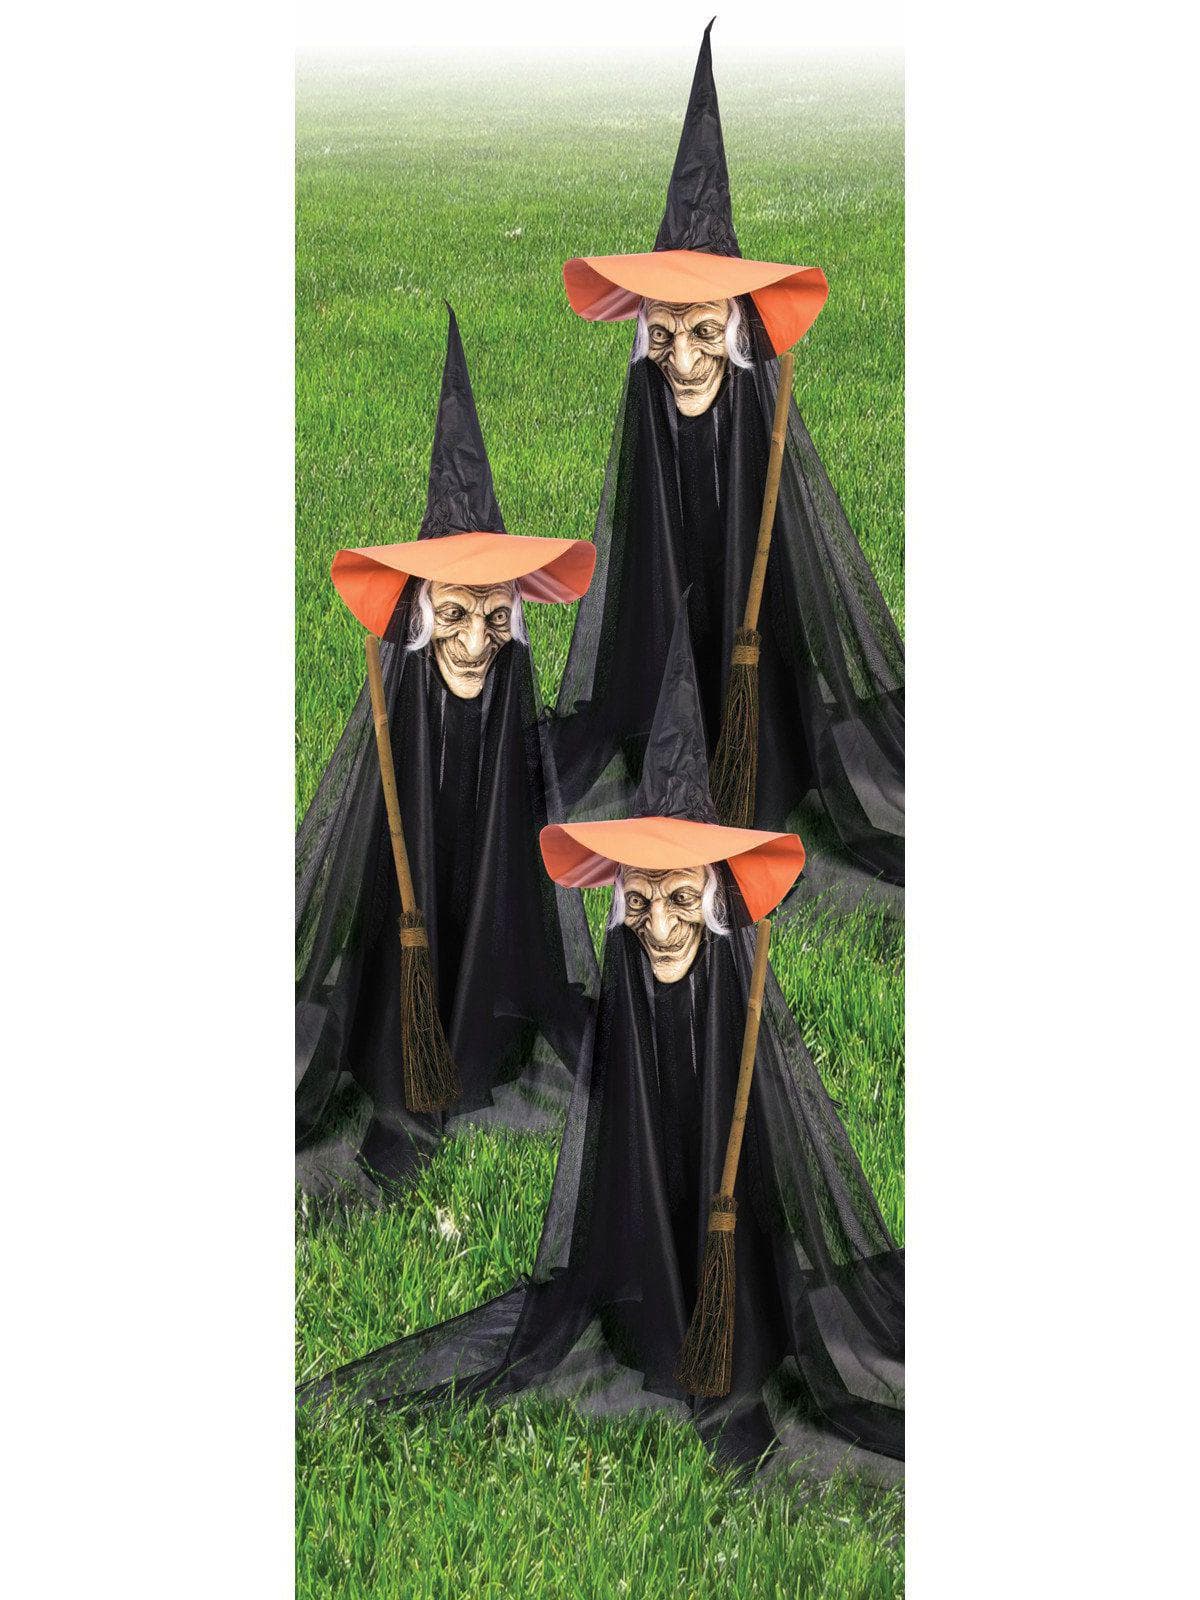 Witchly Group Lawn Ornaments - costumes.com